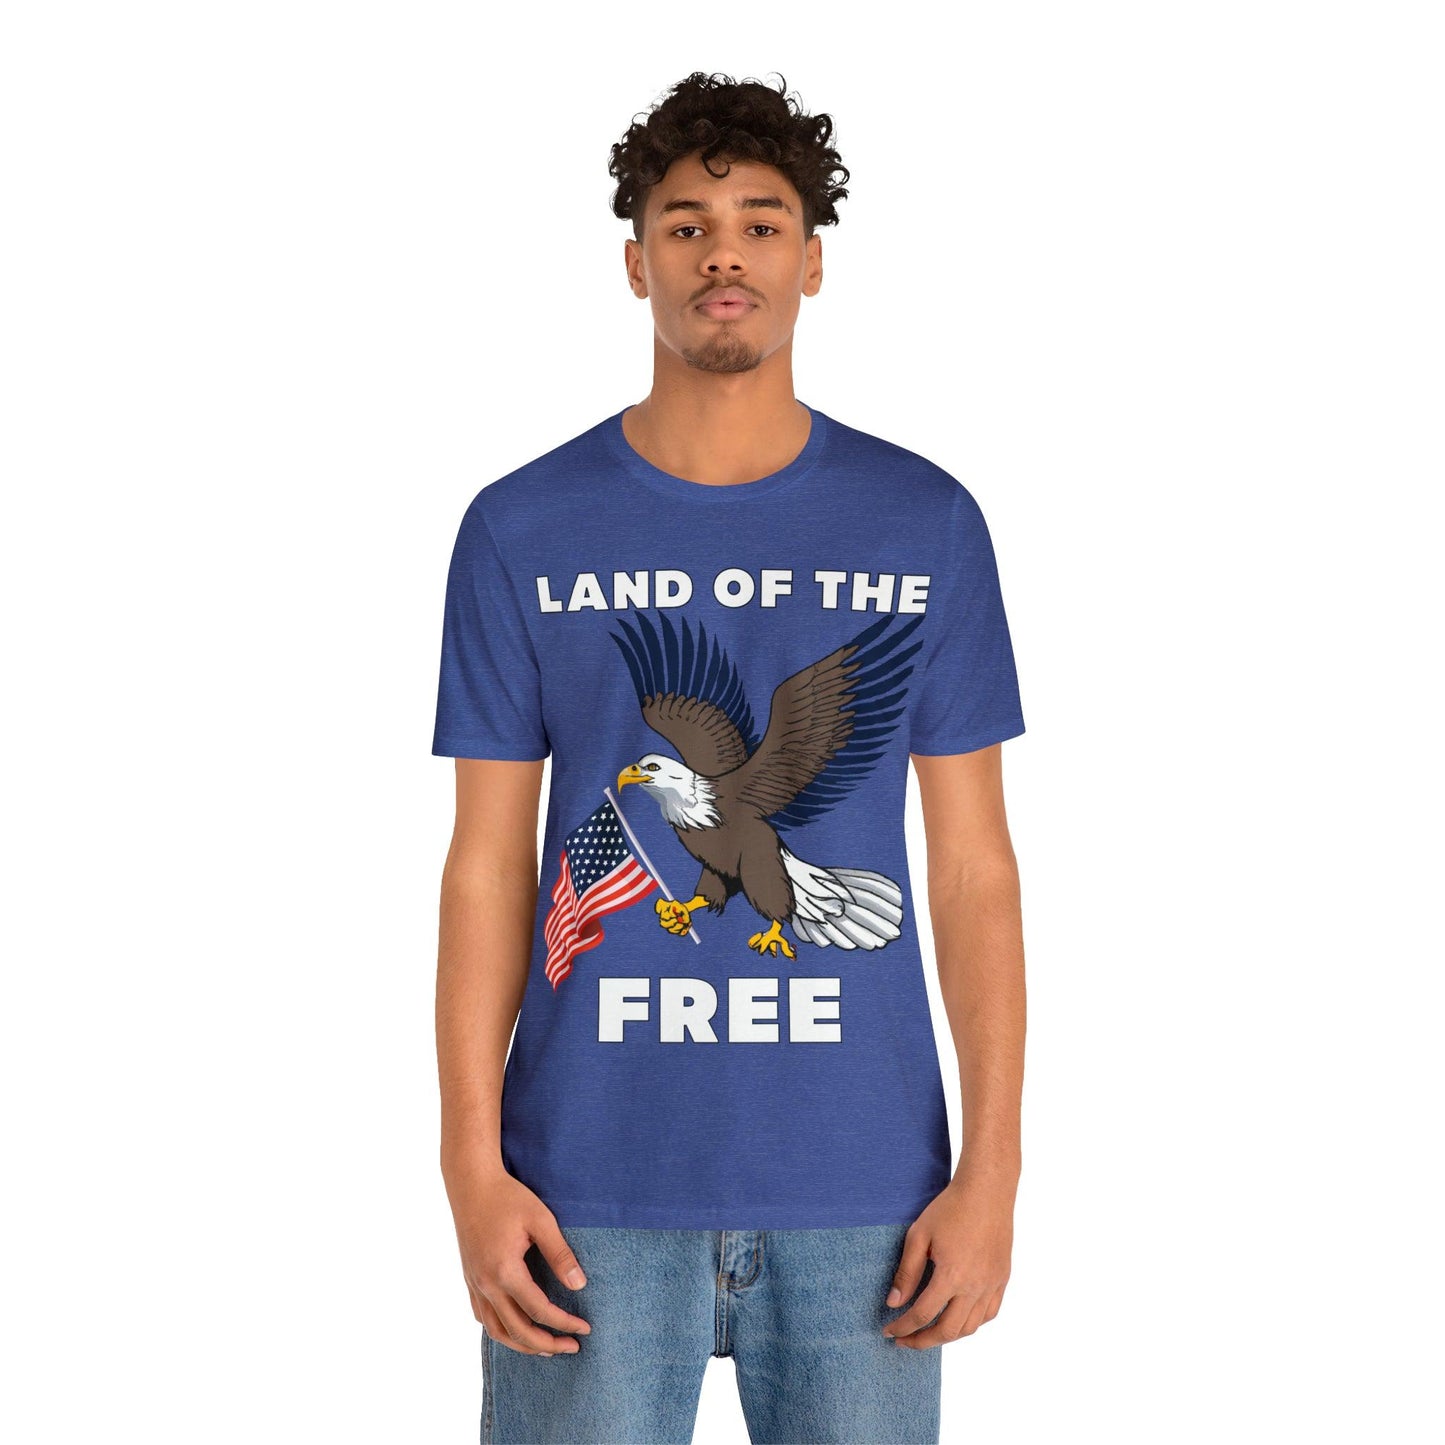 "Land of the Free, Home of the Brave: Celebrate Independence Day with Patriotic Shirts, Flag shirt - Freedom, Fireworks, and More